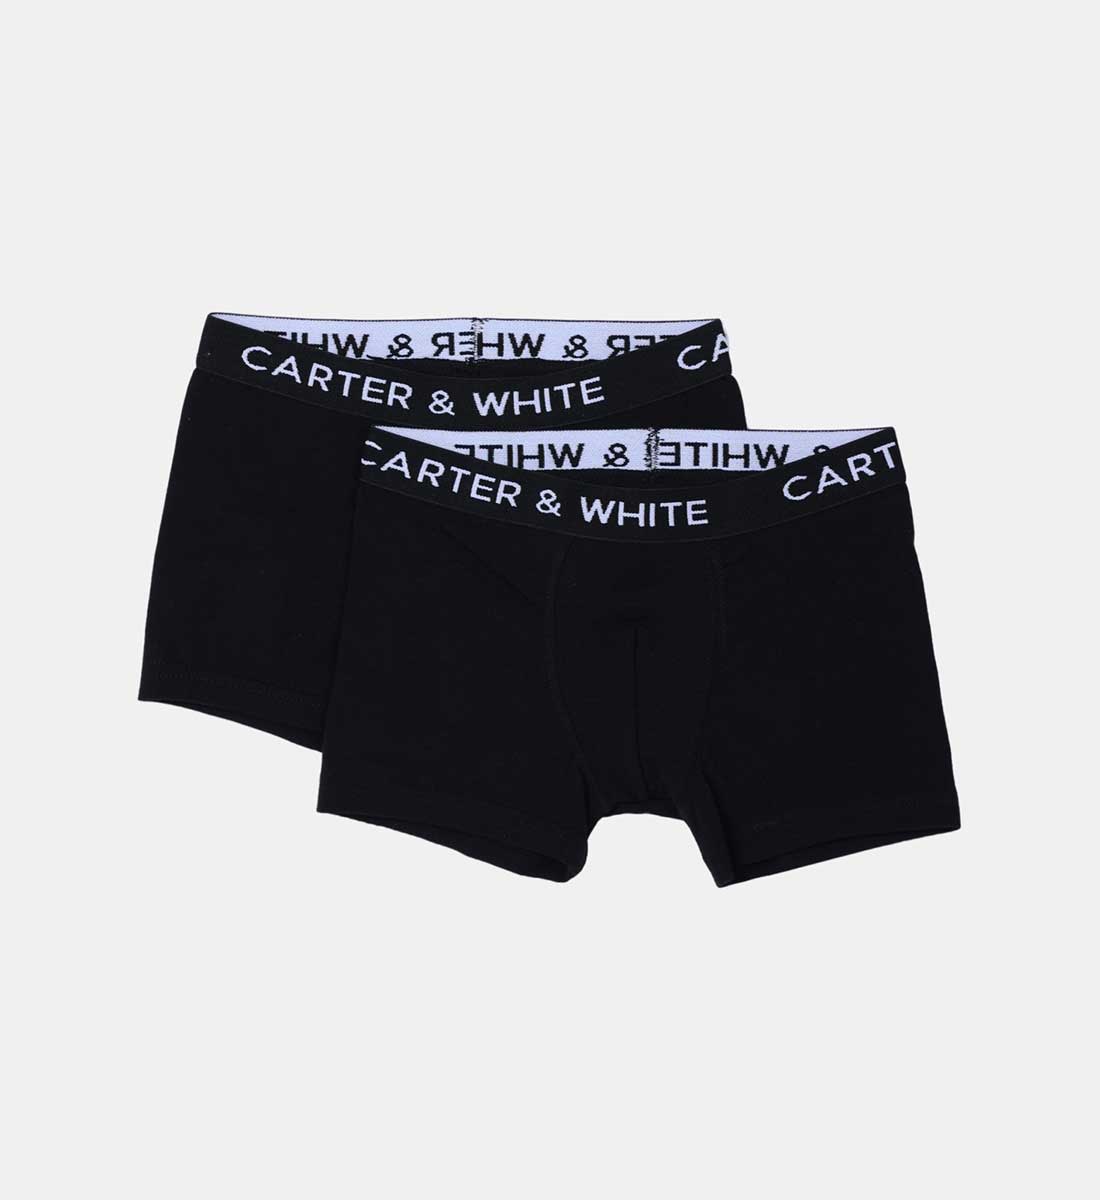 https://www.galerieslafayette.ae/on/demandware.static/-/Sites-master_product/default/dw84322159/images/large/carter-and-white/kids-classic-underwear-2-piece-set-901013751.jpg